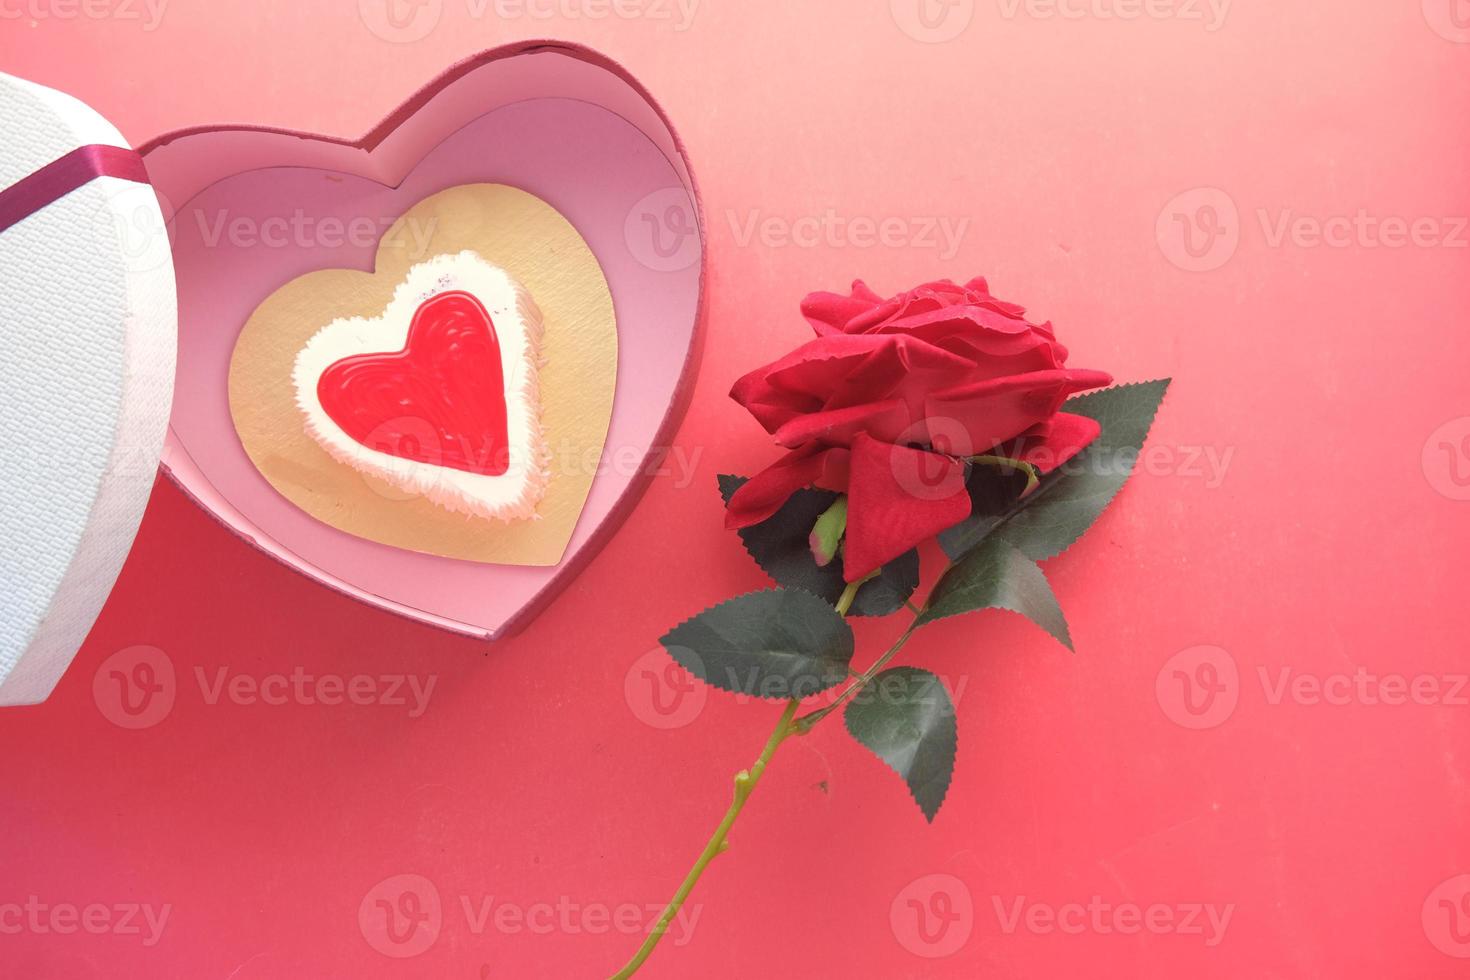 Top view of heart shape cake, gift box, and rose flower on red background photo